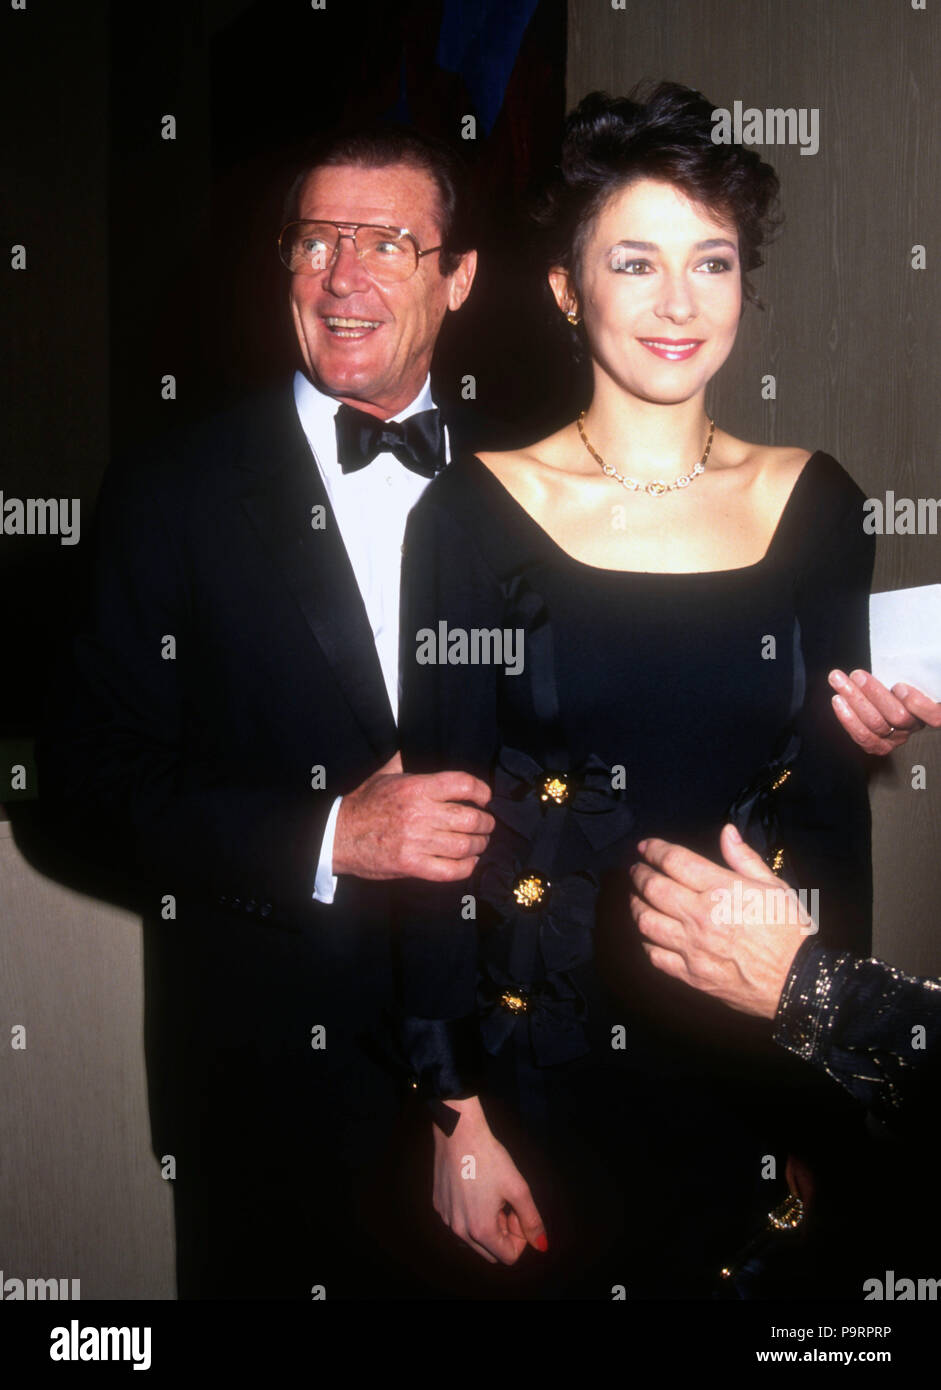 BEVERLY HILLS, CA - MARCH 22: (L-R) Actor Roger Moore and daughter Deborah Moore attend the 44th Annual Writers Guild of America Awards on March 22, 1992 at the Beverly Hilton Hotel in Beverly Hills, California. Photo by Barry King/Alamy Stock Photo Stock Photo